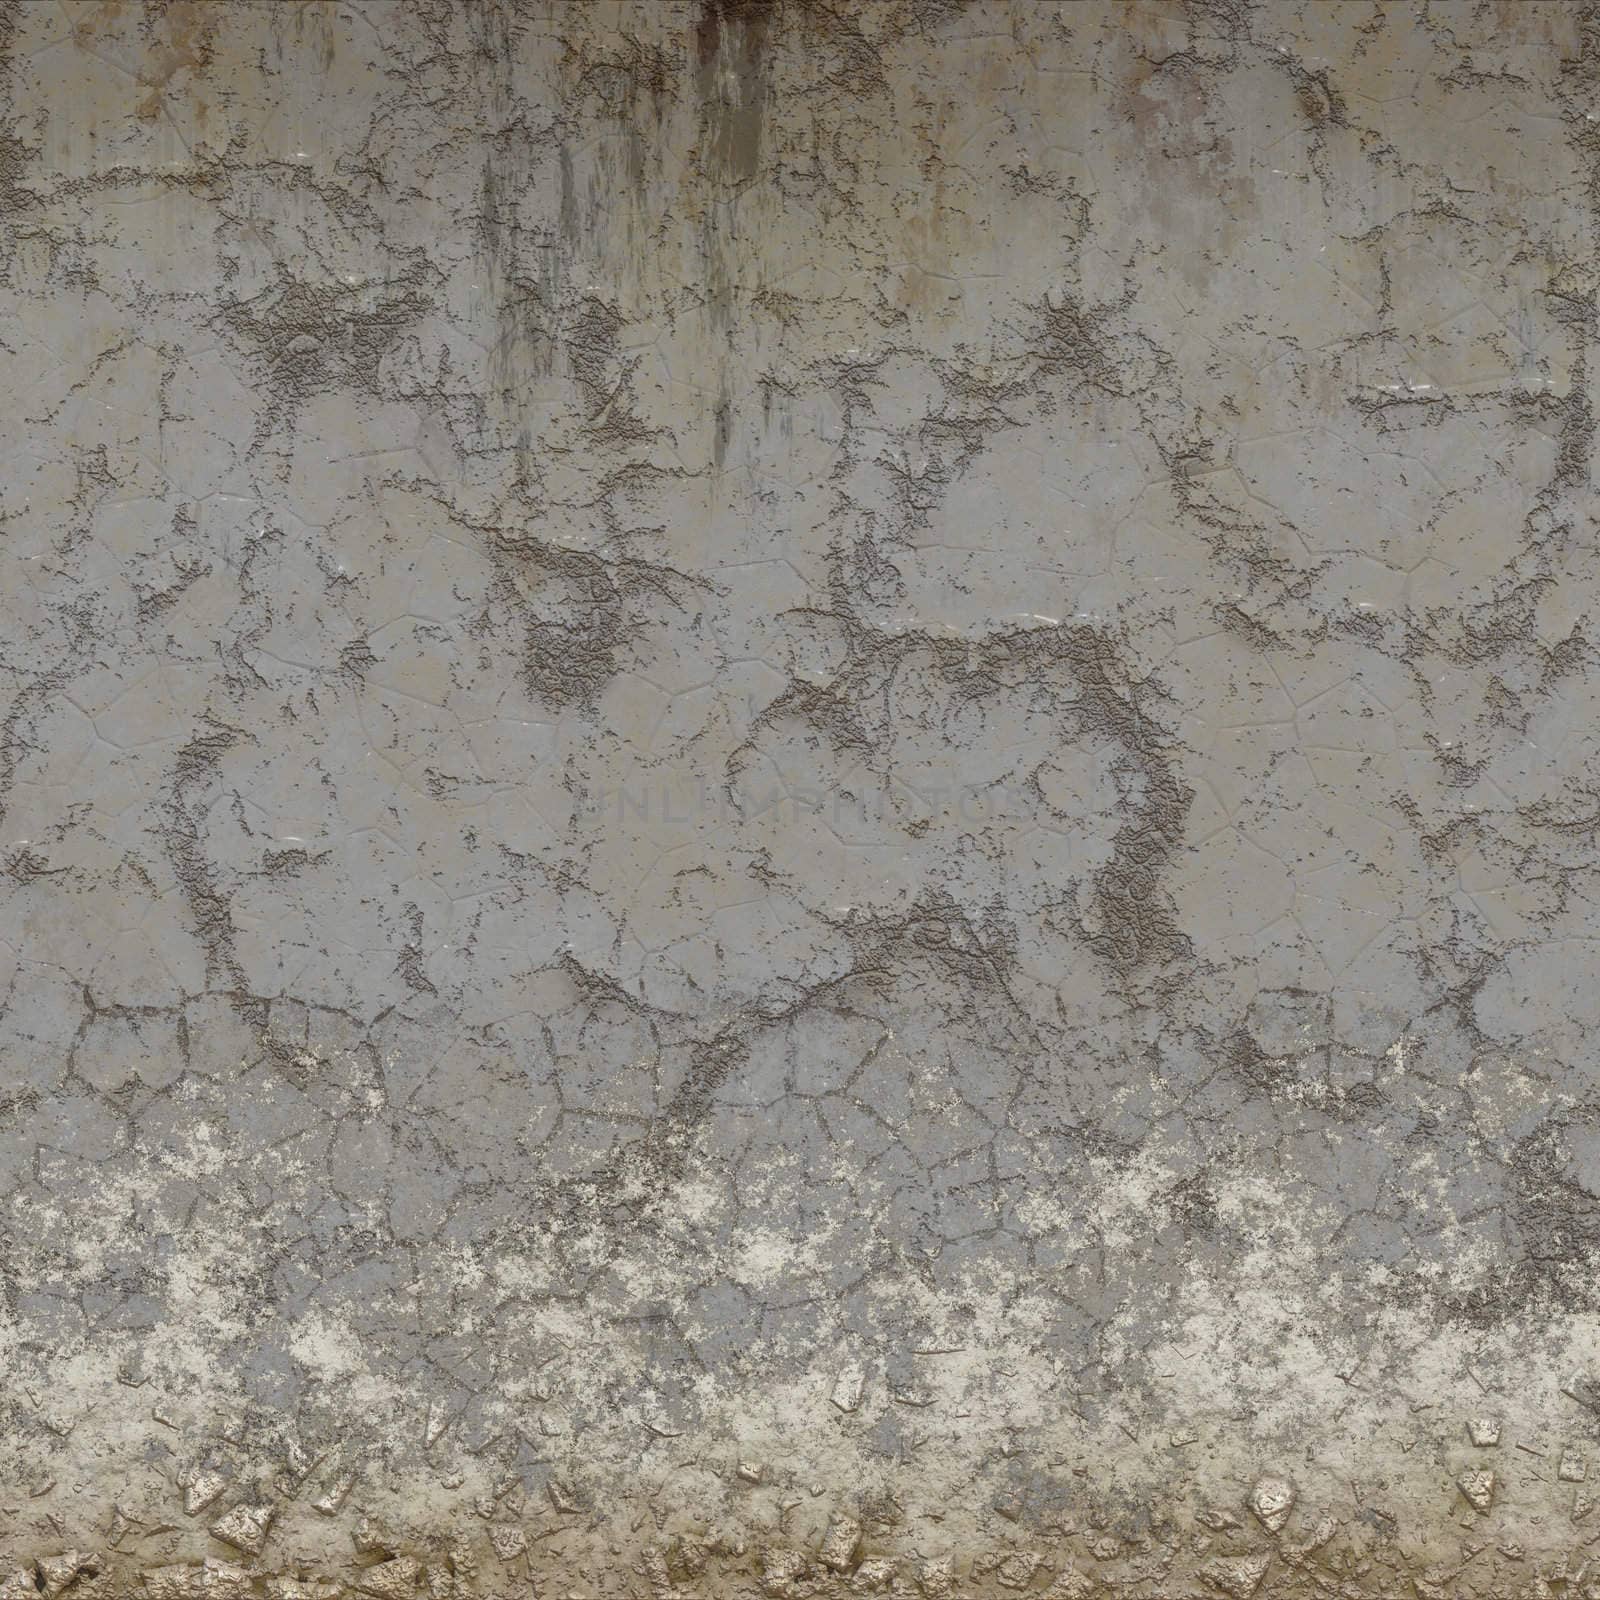 worn out cement or concrete wall, will tile seamlessly, but only horizontally